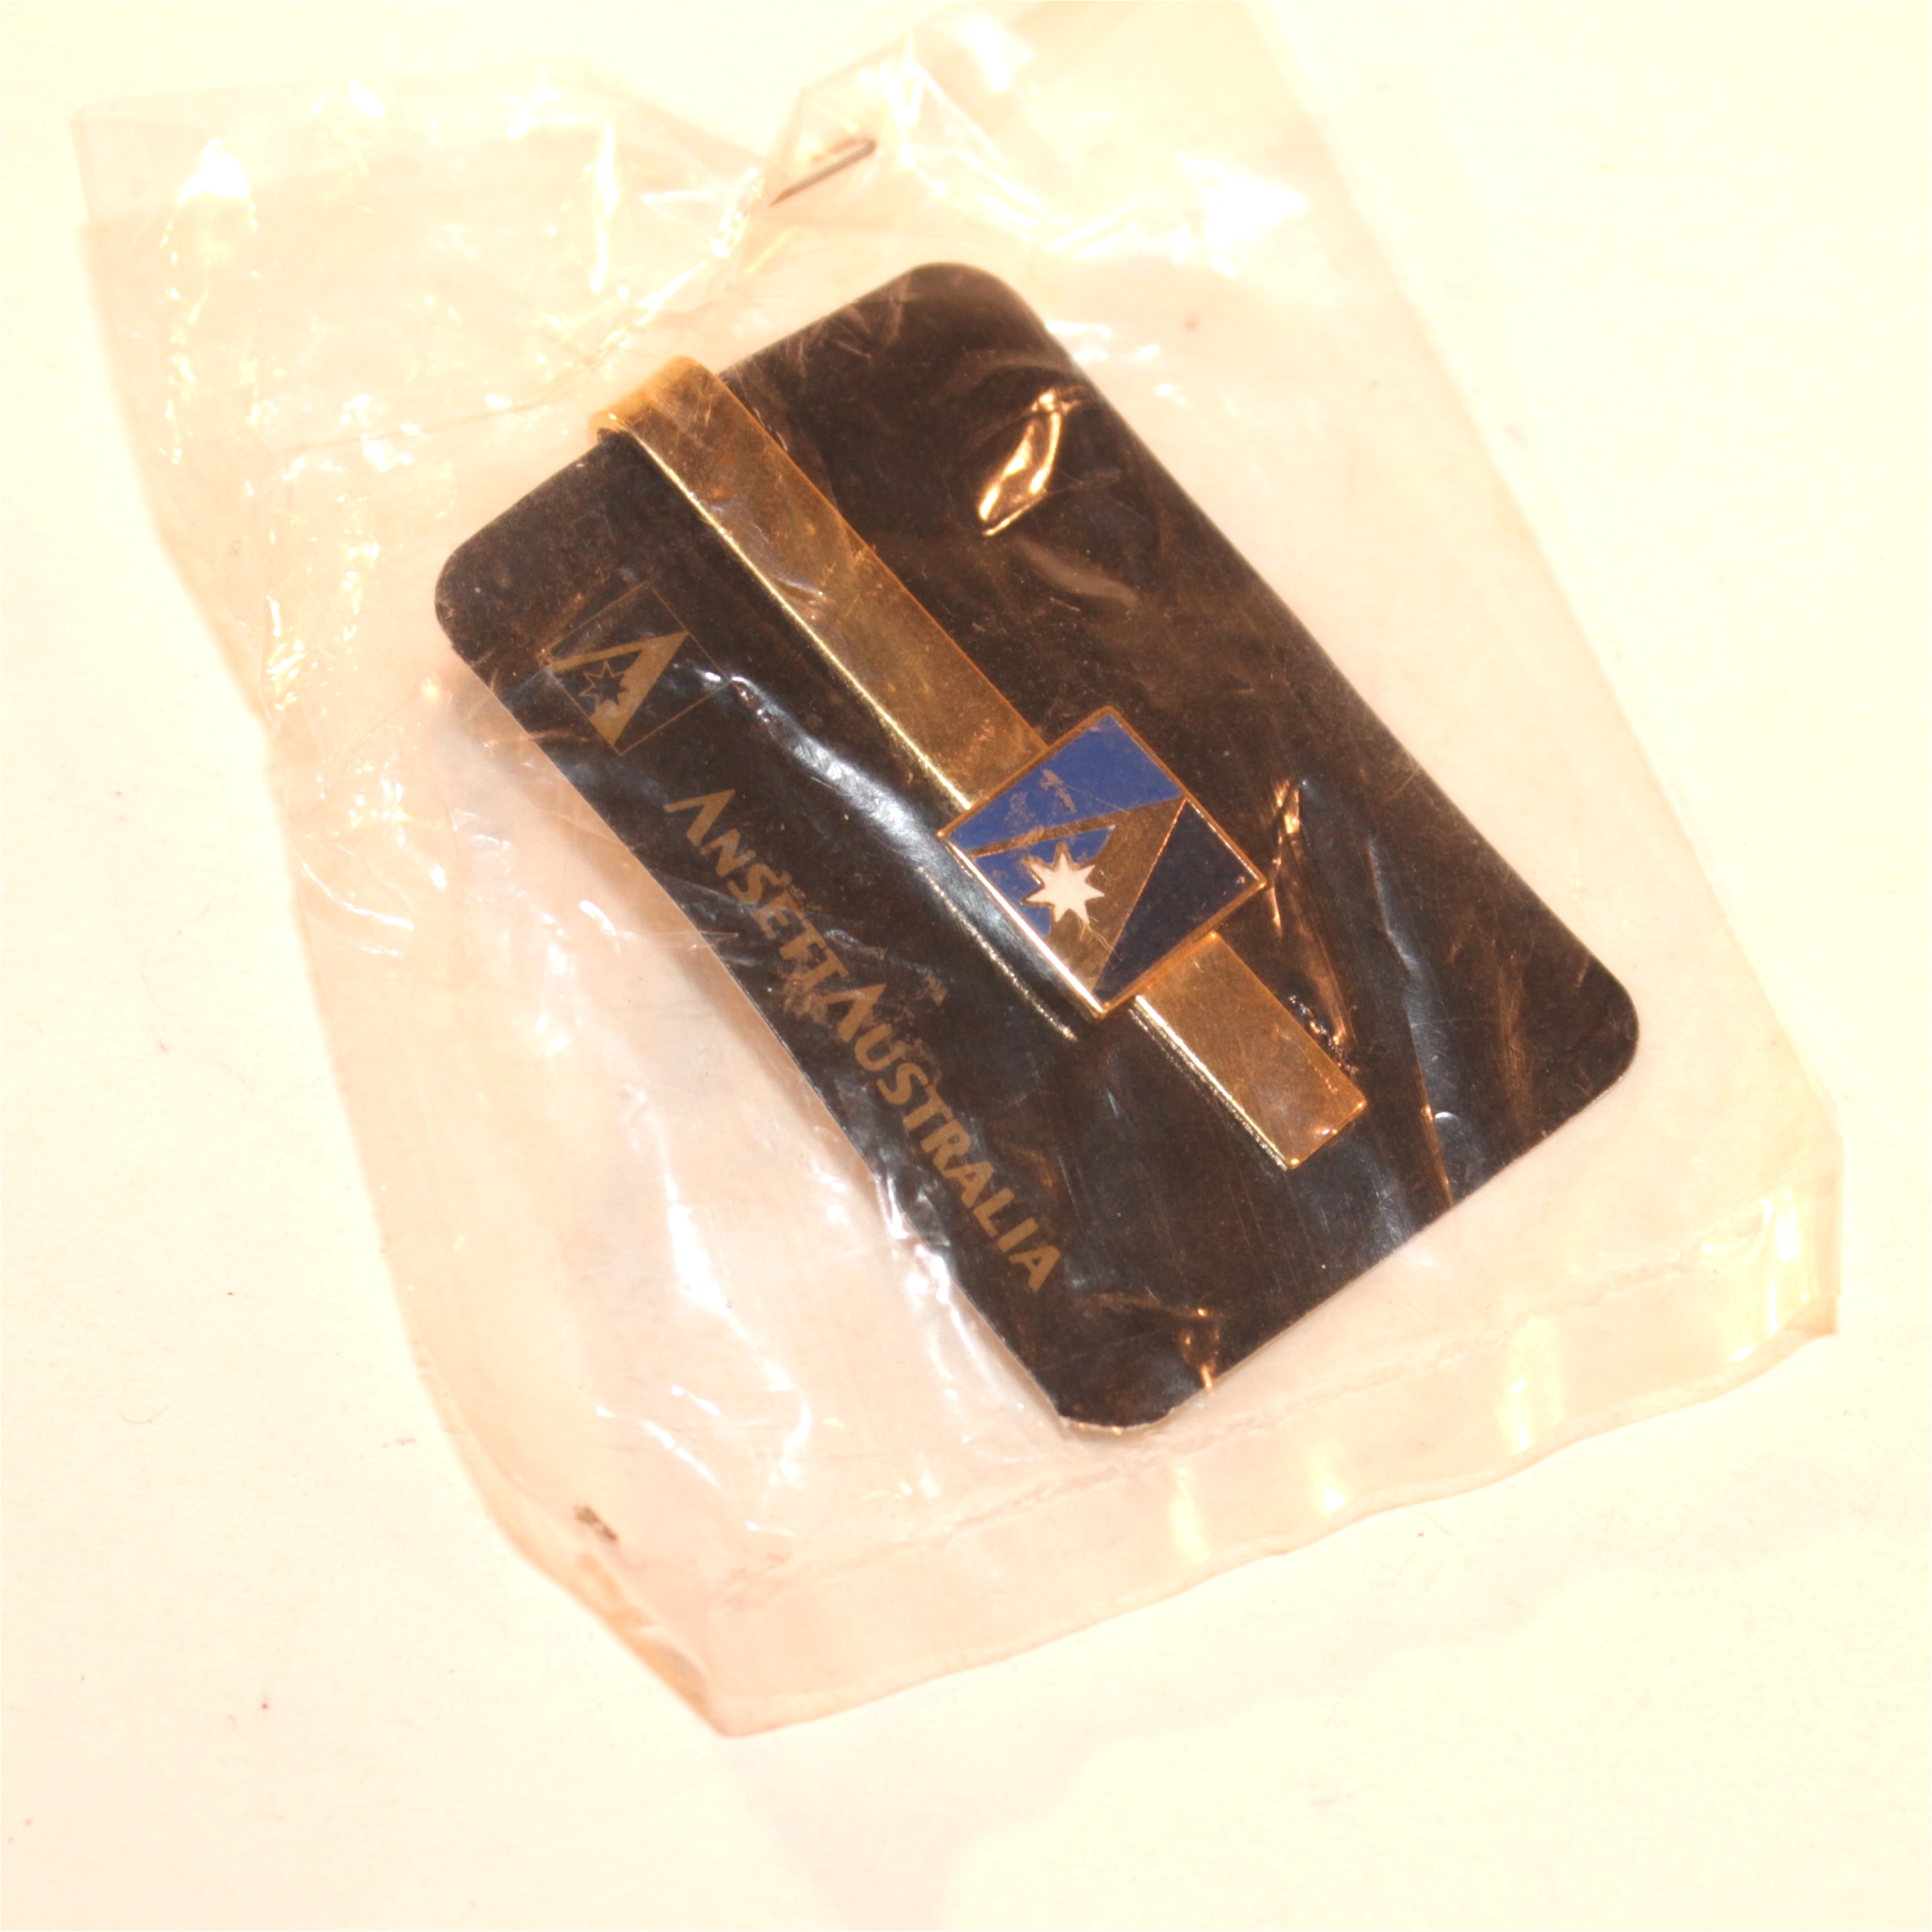 Ansett Airlines Australia Tie Clip Bagged As New